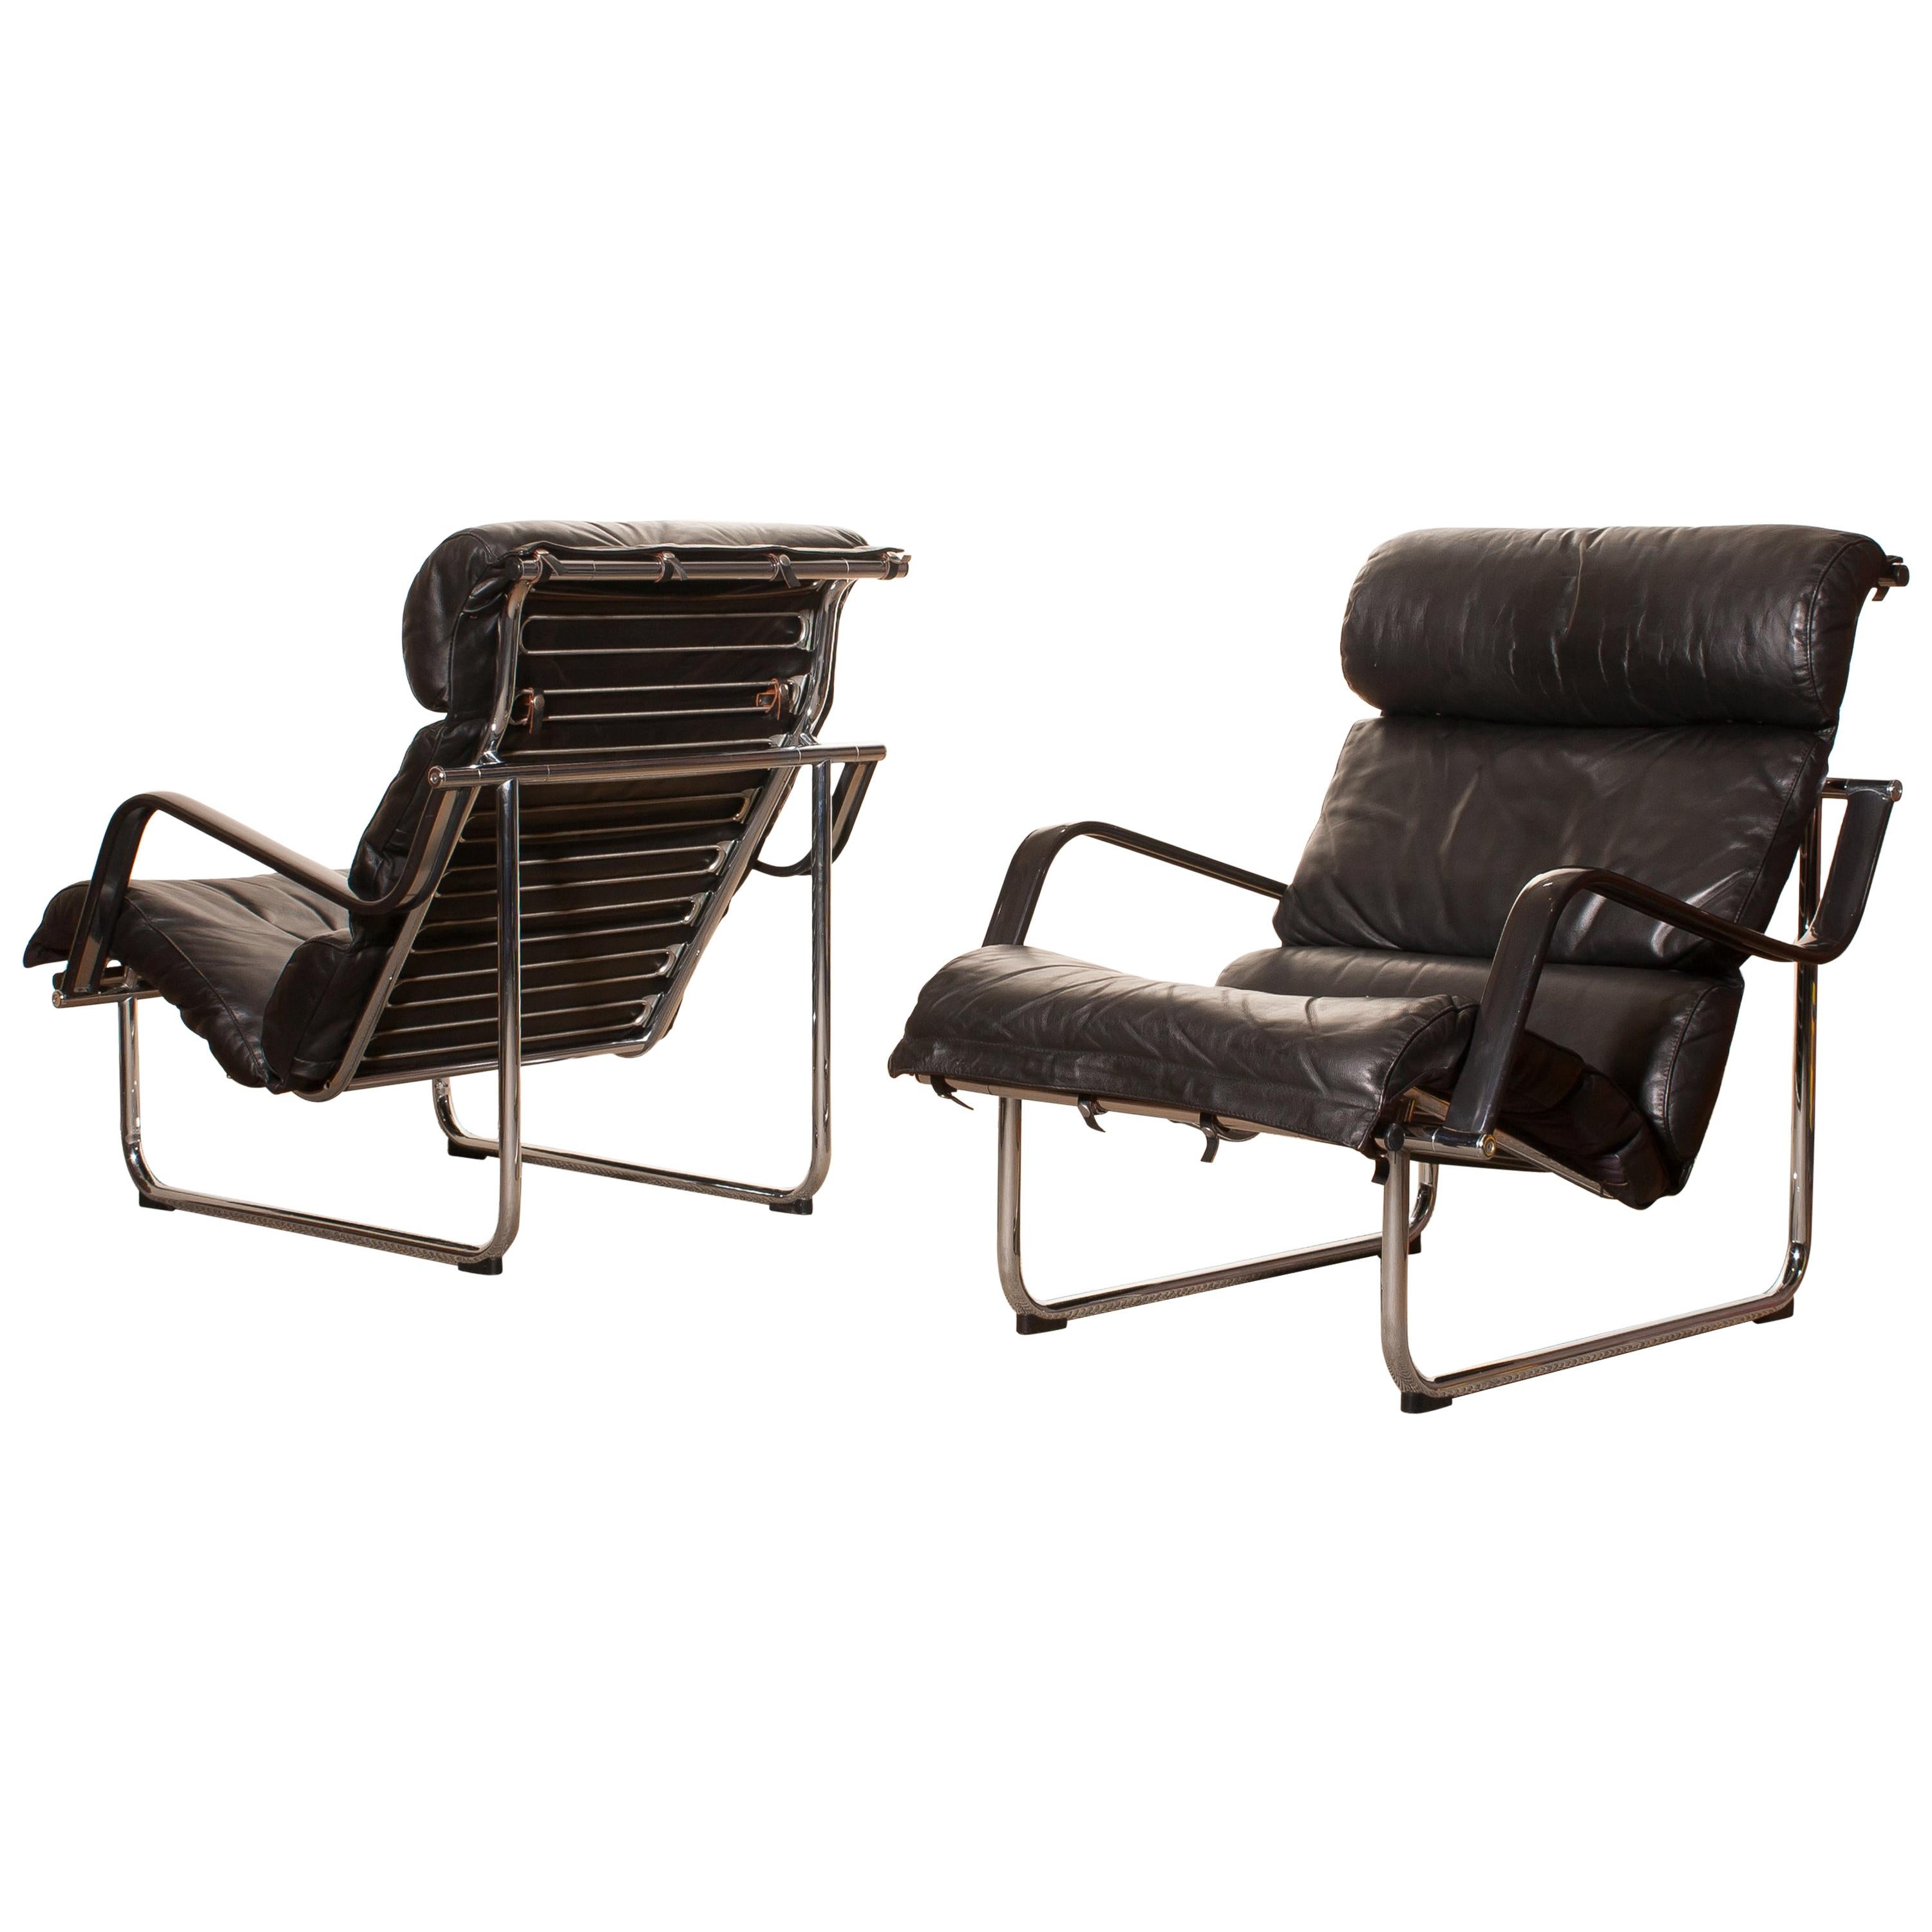 Set of Two Black Leather Lounge Chairs by Yrjö Kukkapuro "Remmie" from Finland